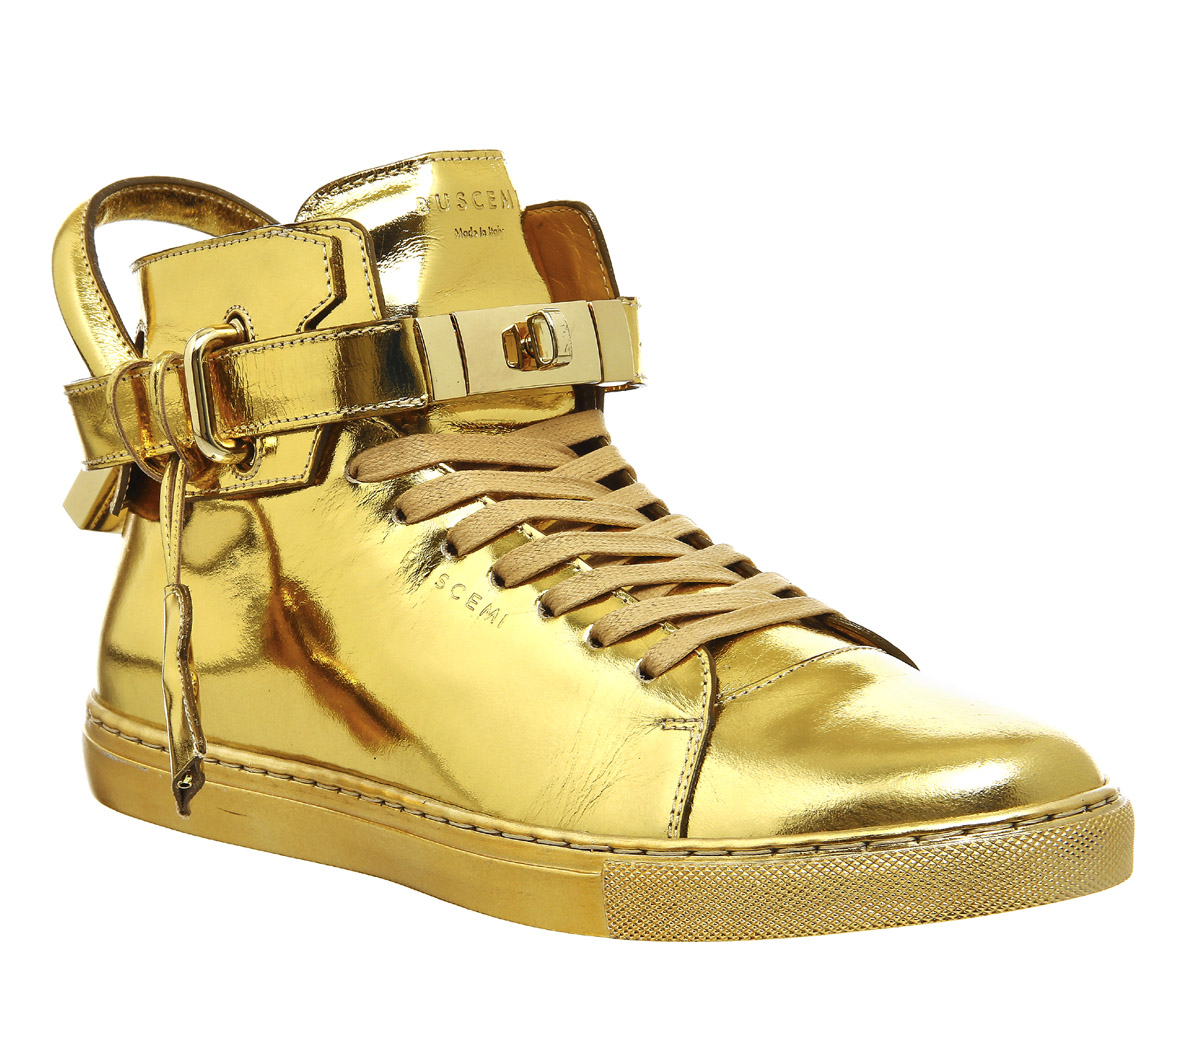 buscemi gold sneakers cheap online